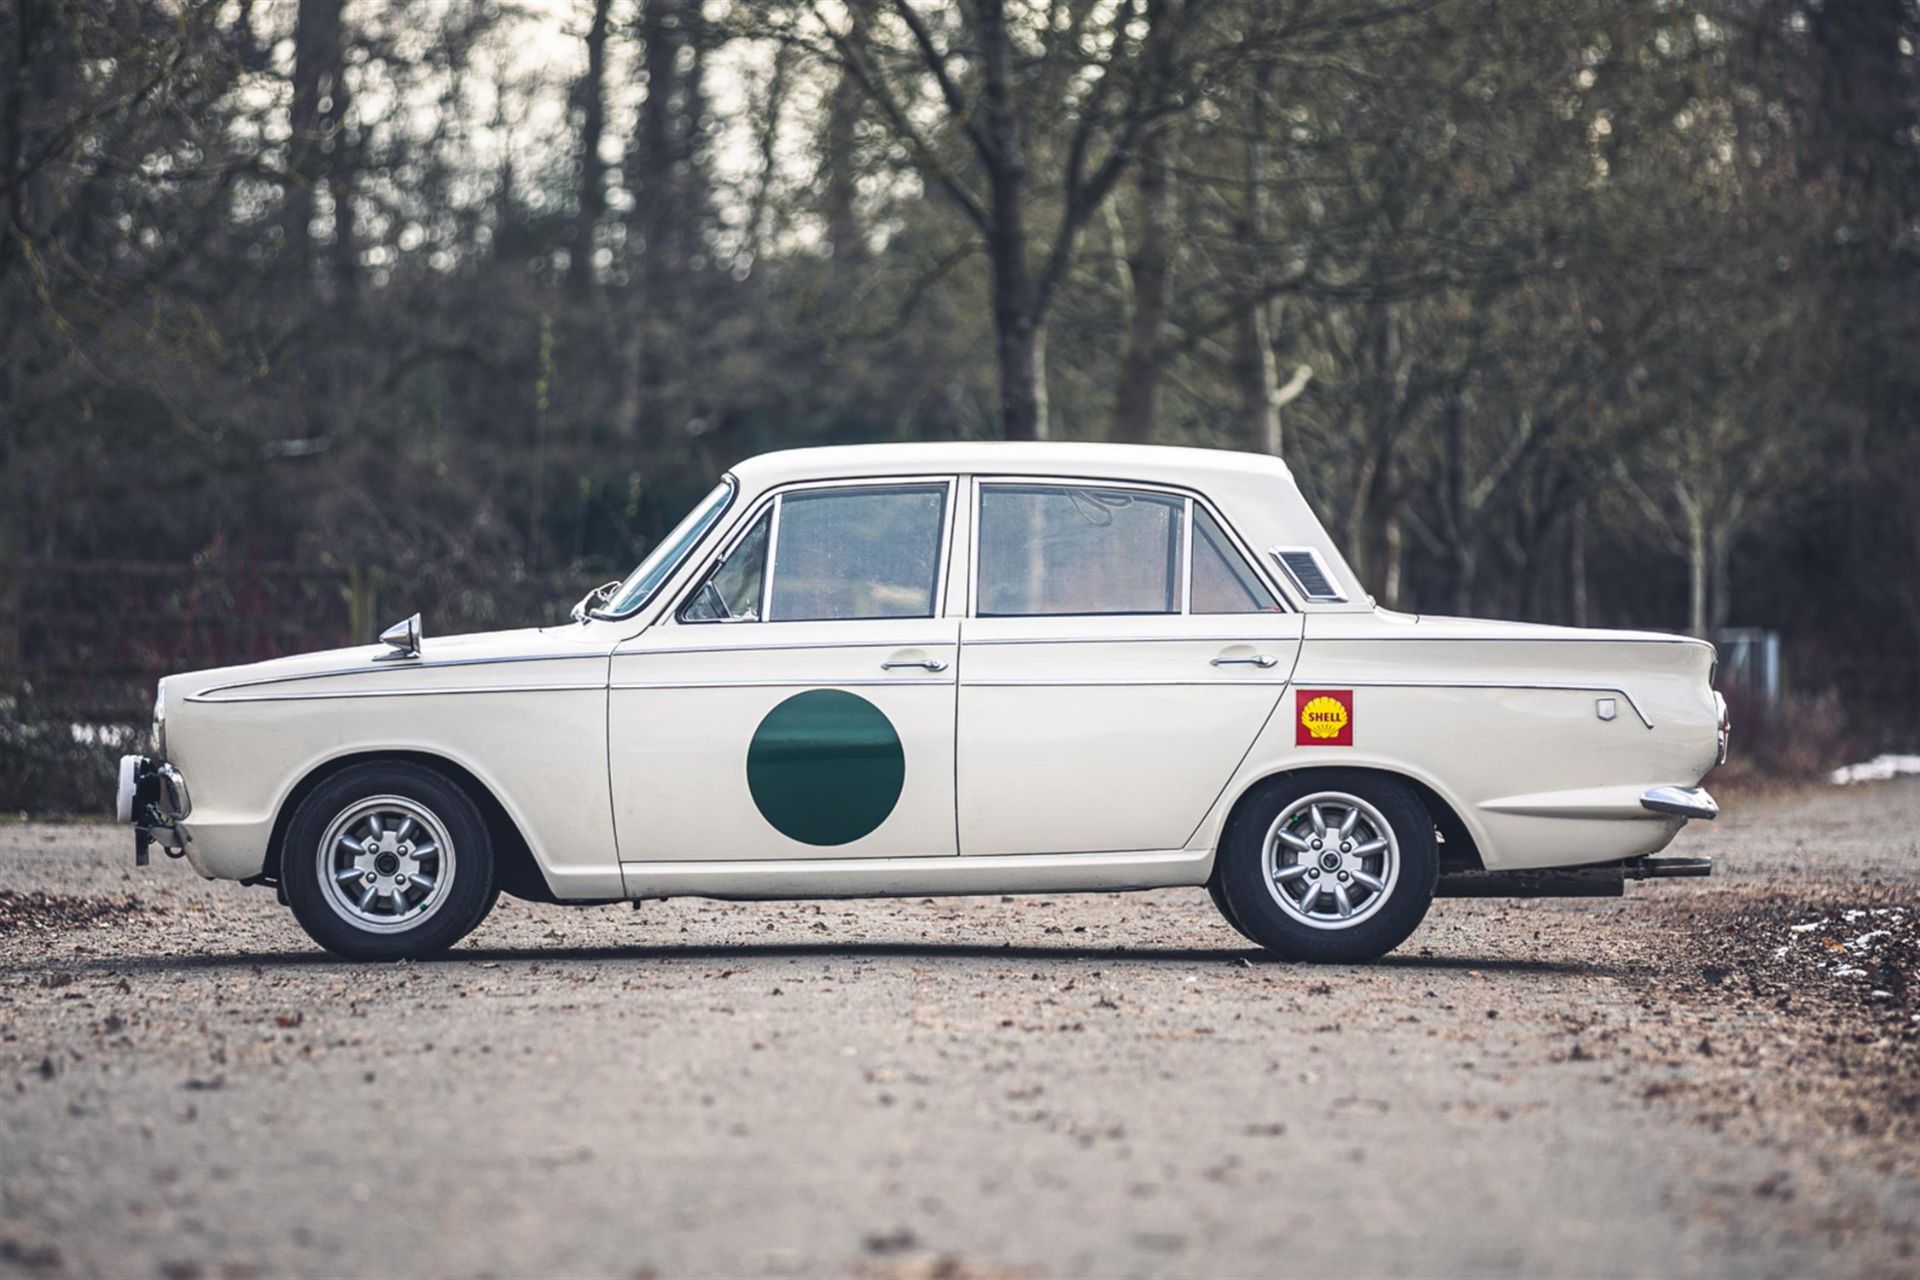 1966 Ford Cortina GT (Mk1) Four-Door Rally Car (LHD) - Image 7 of 10